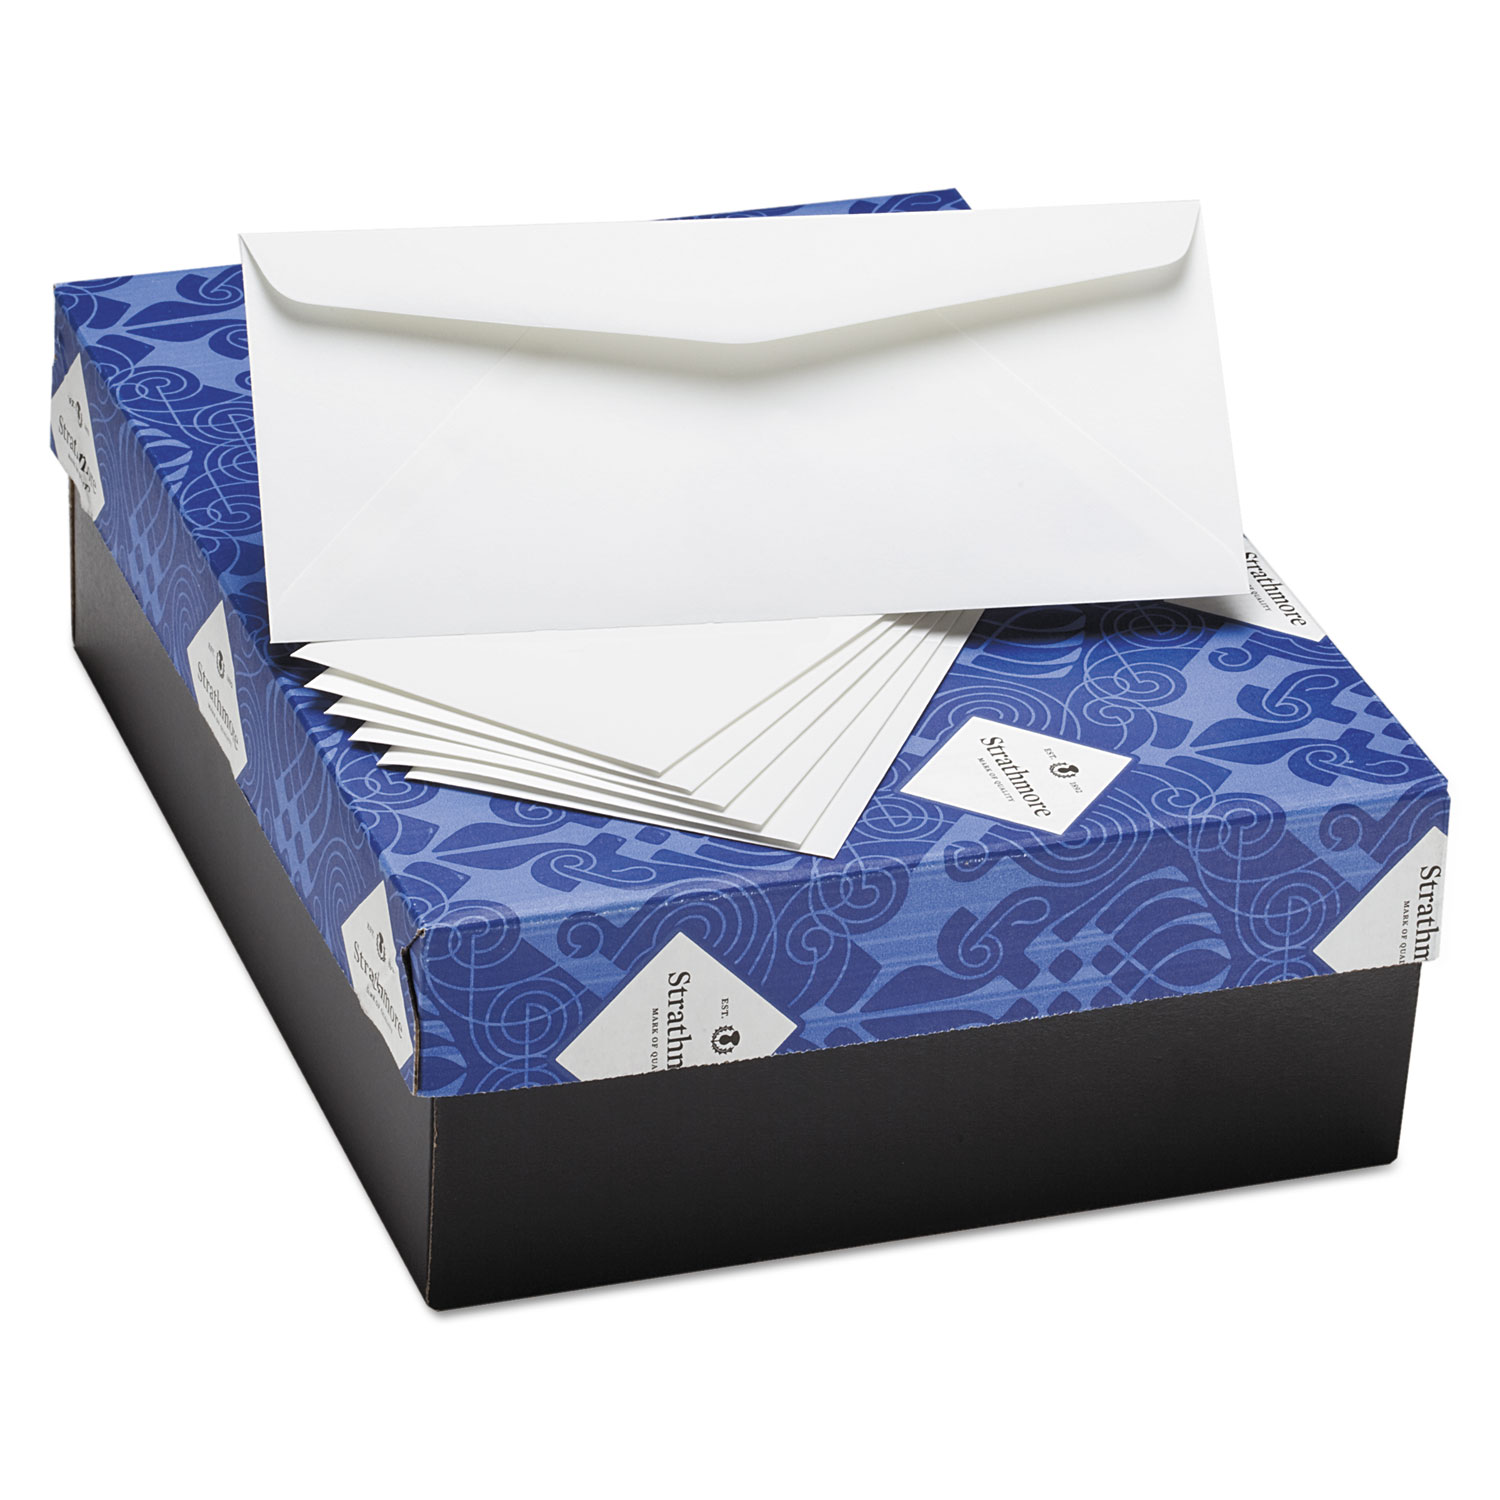 Writing 25% Cotton Business Envelopes, #10, Bankers Flap, Gummed Closure, 4.13 x 9.5, Bright White, 500/Box